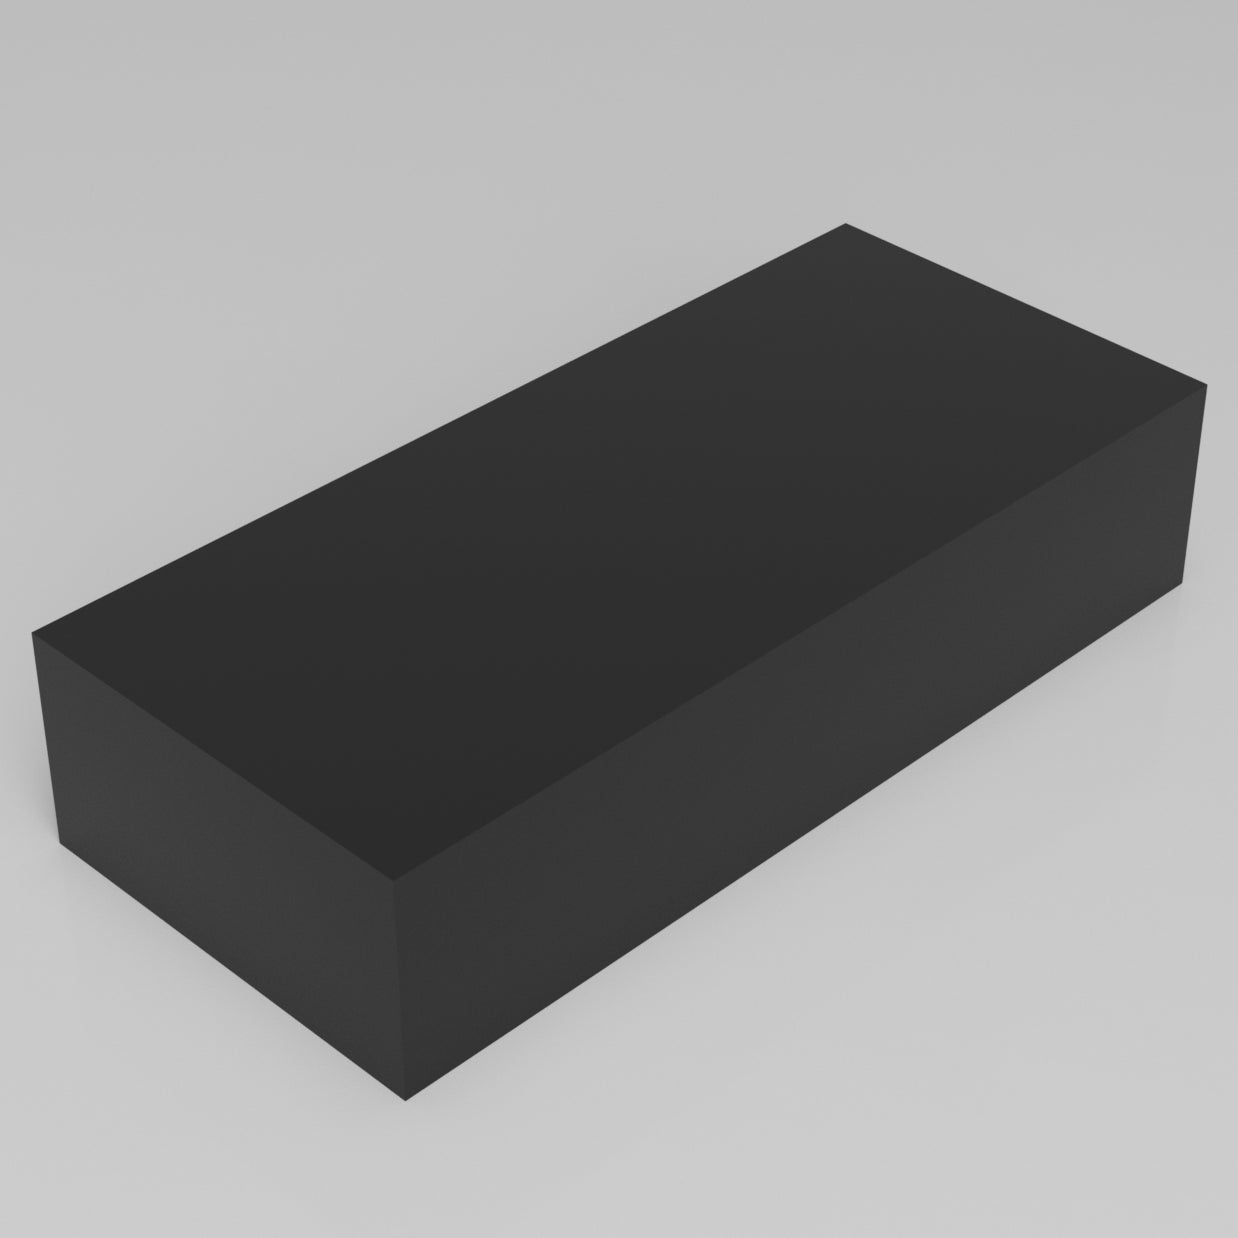 Machinable Wax Rectangular Block Front View 4 Inch by 8 Inch by 18 Inch